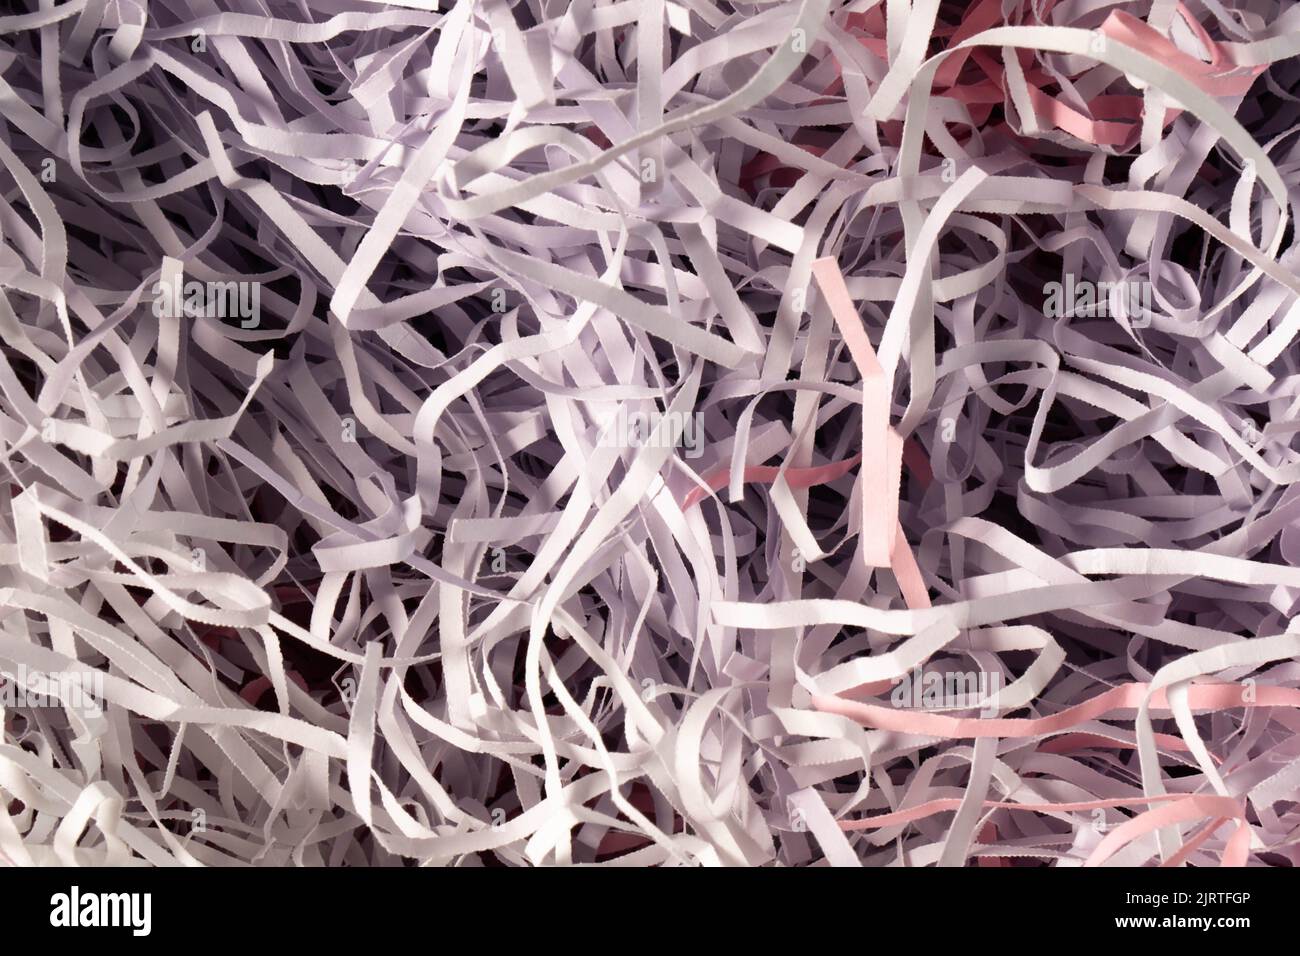 Texture lilac and purple pastel spaghetti shredded packing paper. Paper used to protect fragile object while in transport, filling gift boxes and gift wrapping. Wallpaper and Texture. Stock Photo